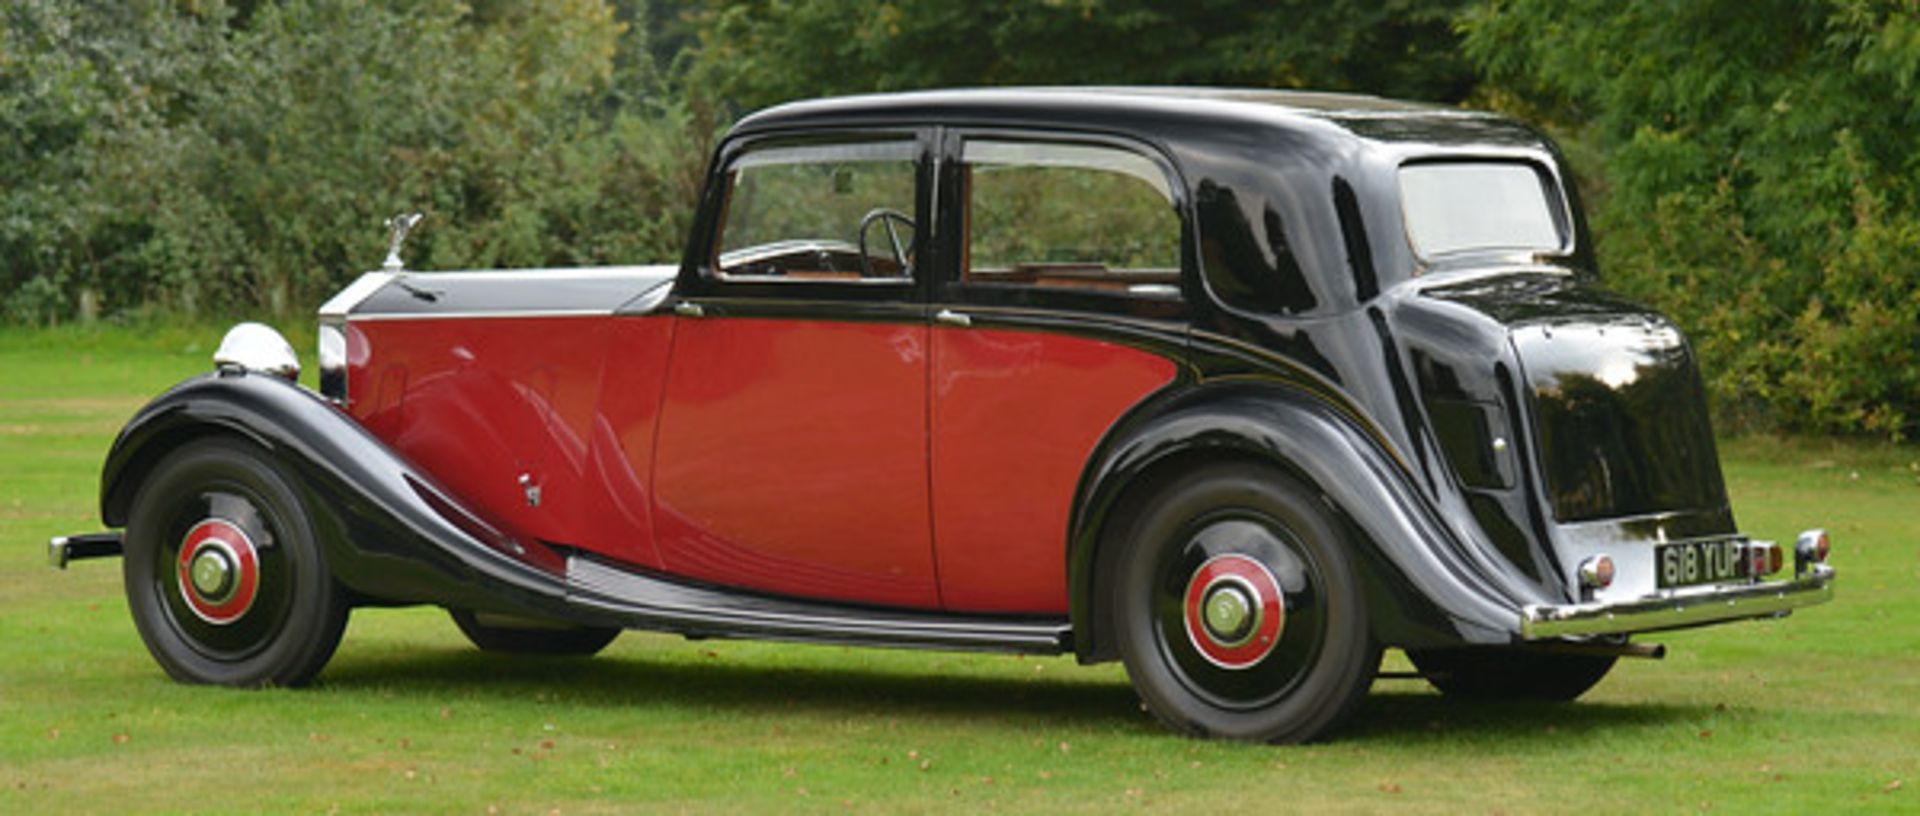 1937 Rolls Royce 25 / 30  James Young Sports Saloon
Chassis Number: GUL73Registration: 618 YUP A - Image 3 of 9